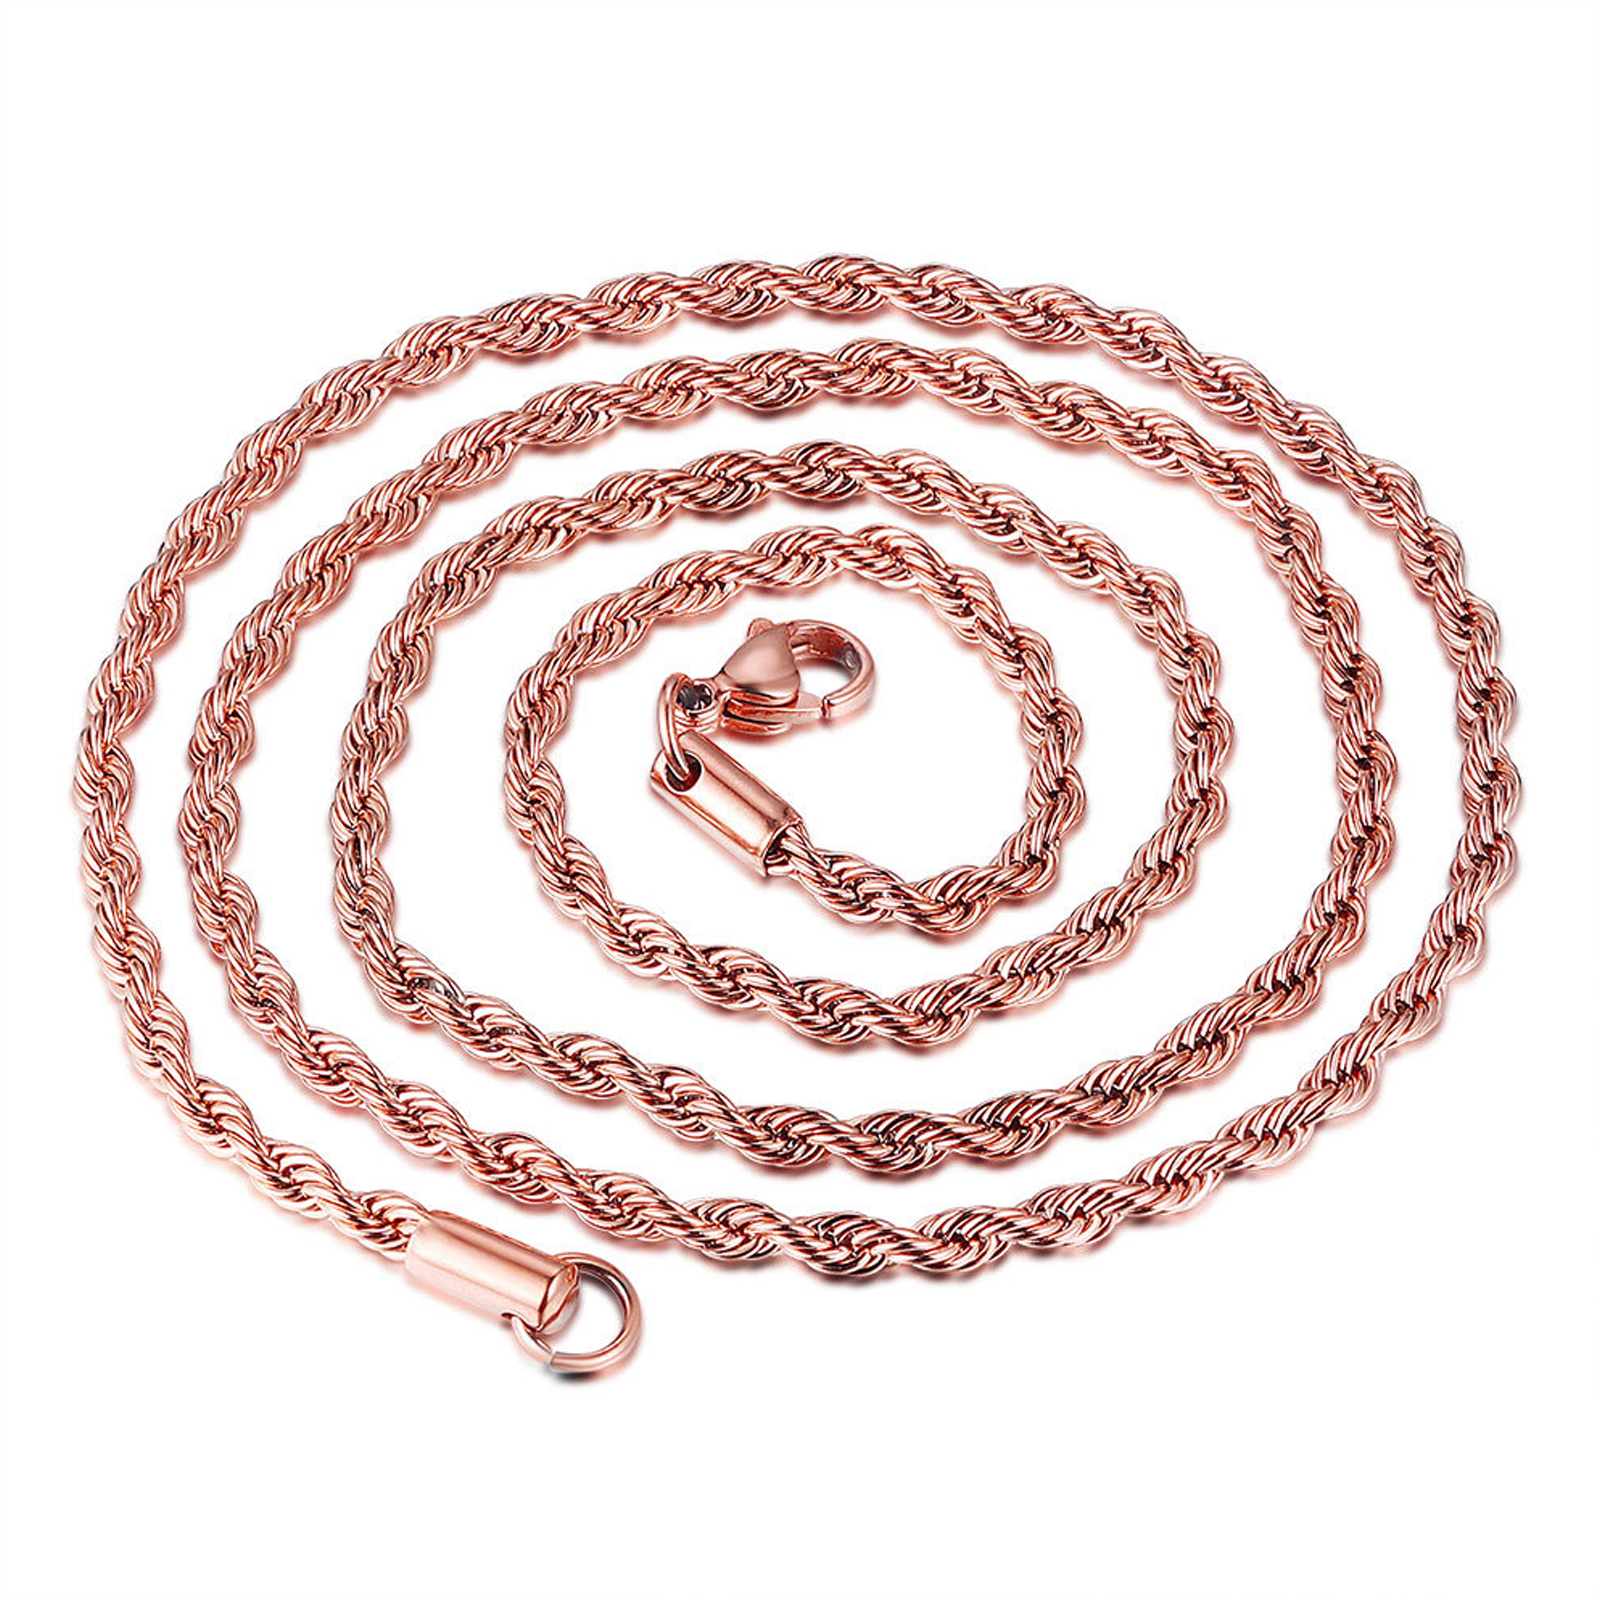 Picture of Stainless Steel Braided Rope Chain Necklace Rose Gold 46cm(18 1/8") long, 1 Piece